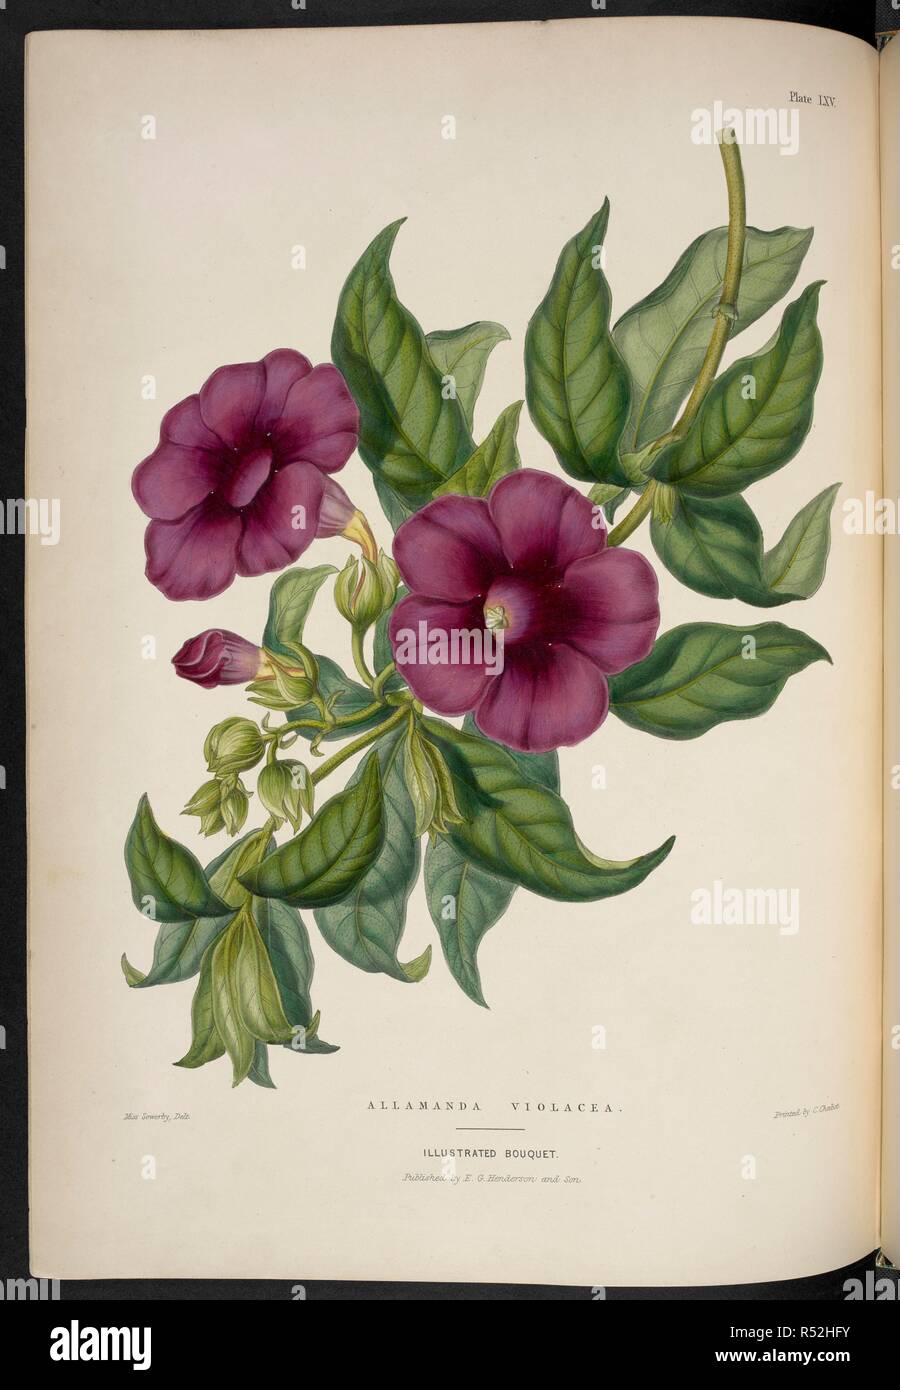 Allamanda Violacea. . The Illustrated Bouquet, consisting of figures, with descriptions of new flowers. London, 1857-64. Source: 1823.c.13 plate 65. Author: Henderson, Edward George. Sowerby, Miss. Stock Photo